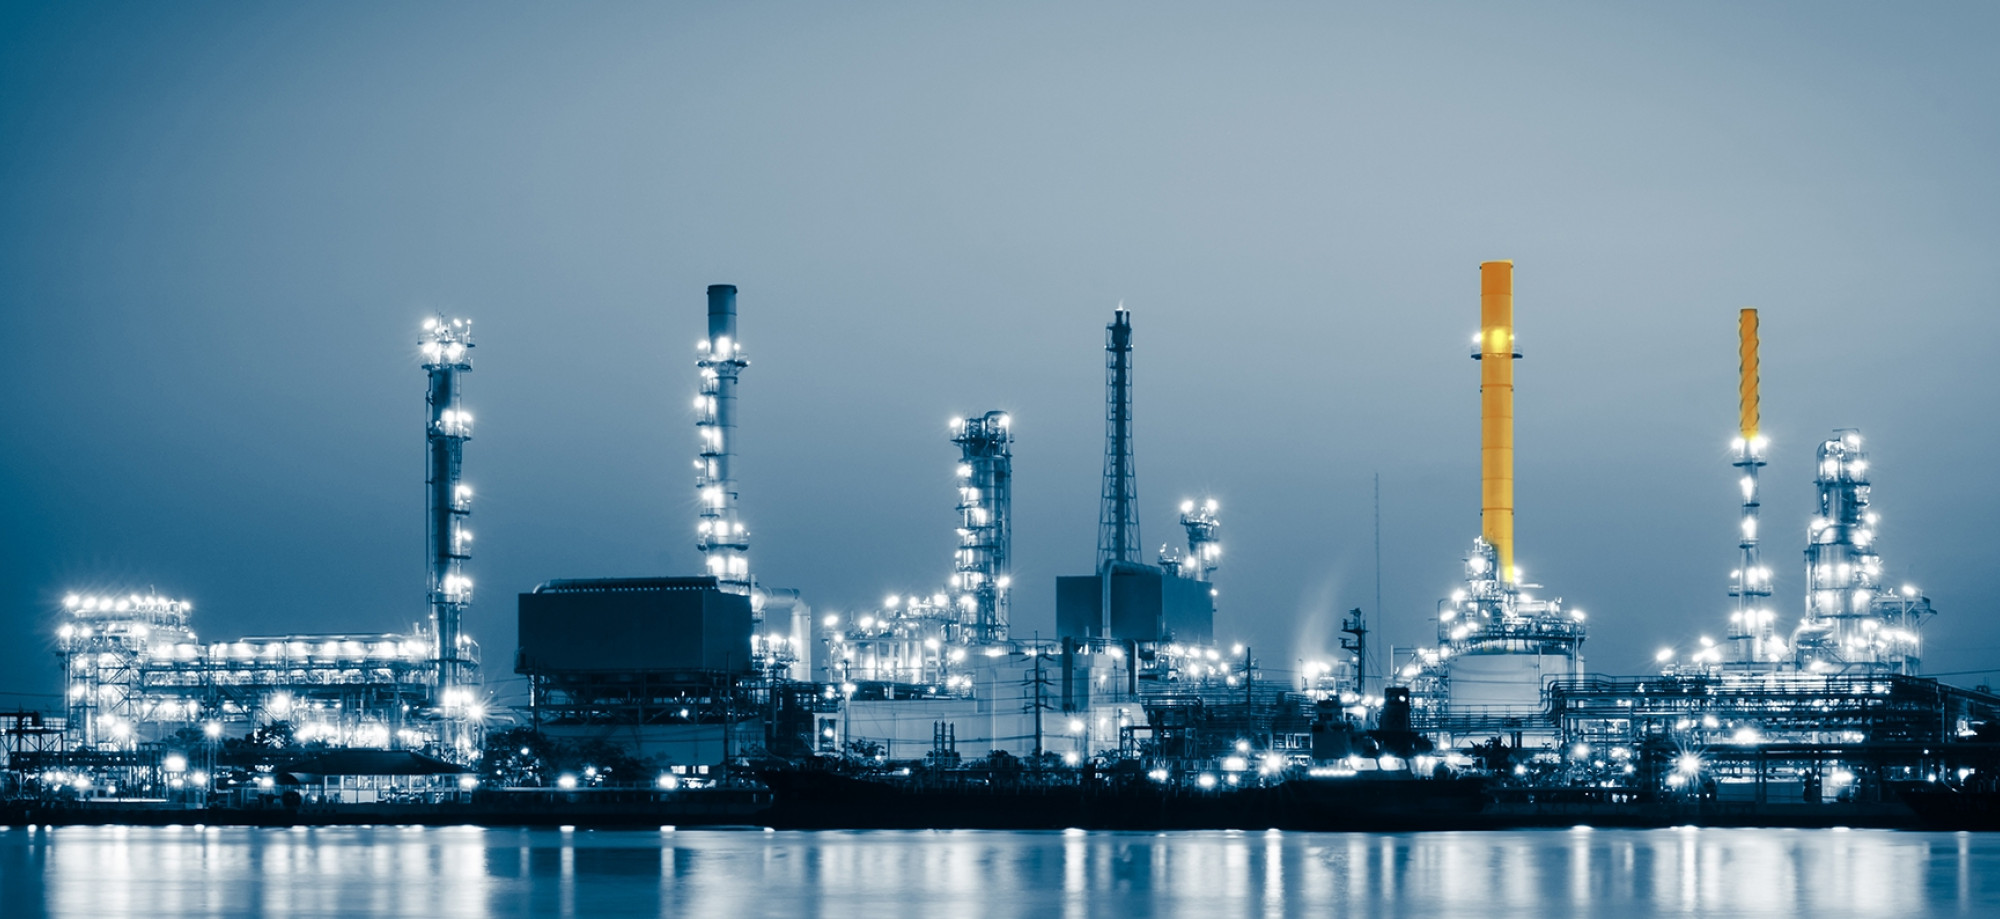 Refineries and Industrial Plants